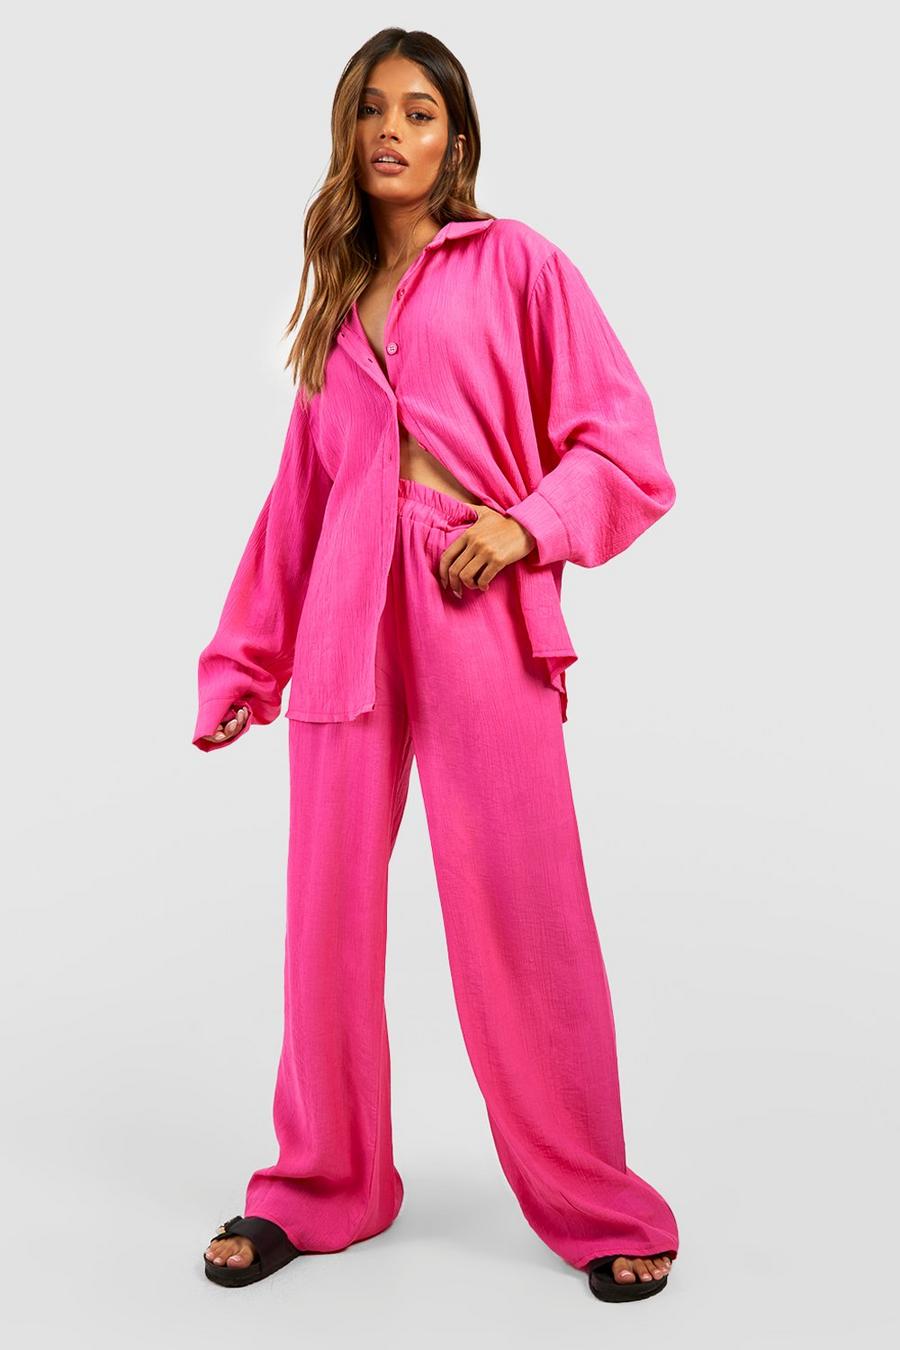 Hot pink Crinkle Relaxed Fit Wide Leg Pants